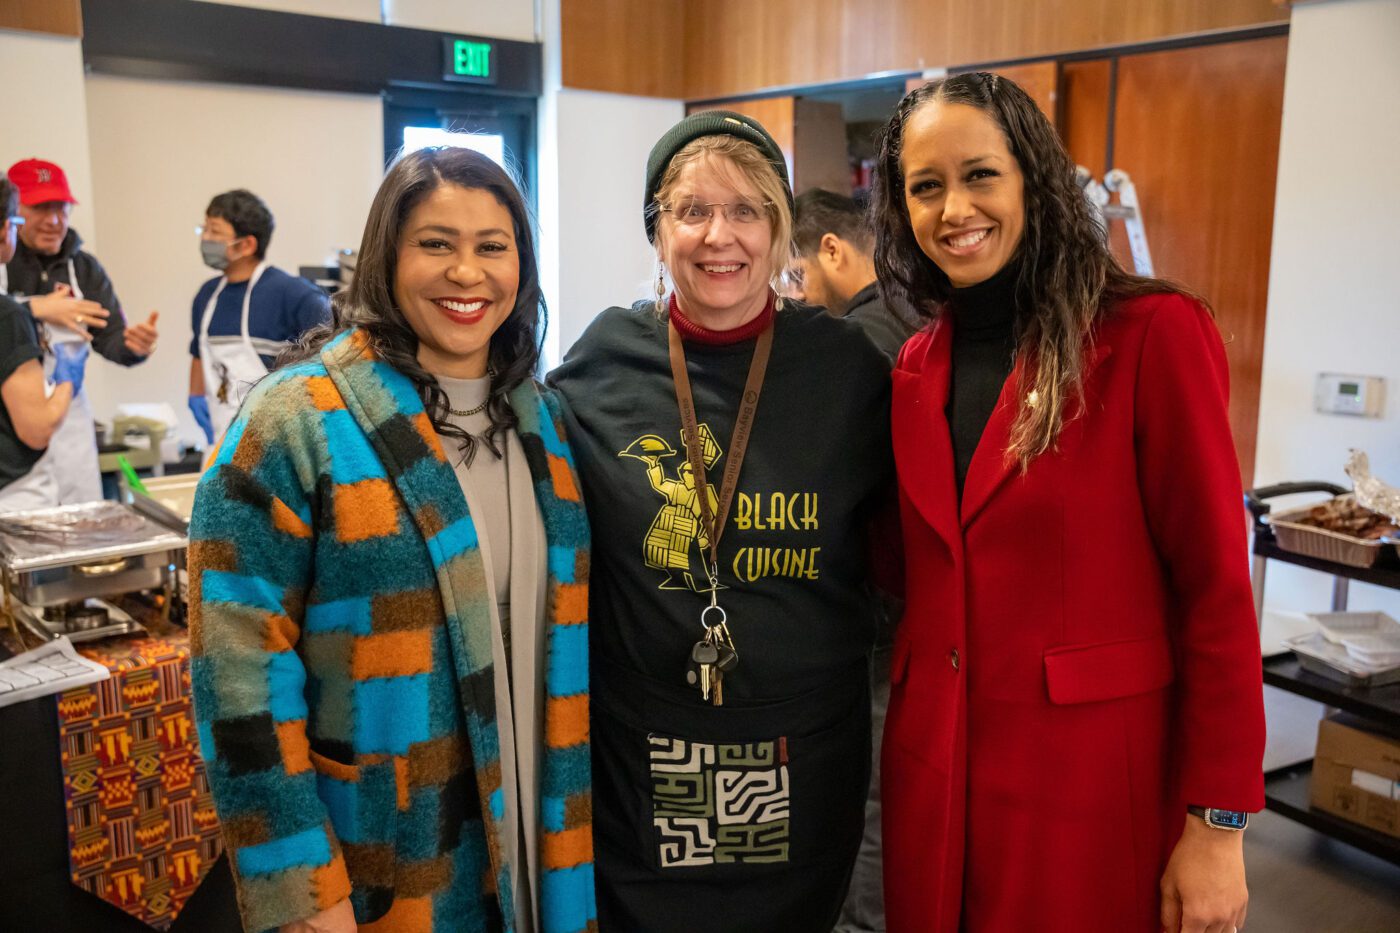 Mayor-London-BreedDA-Jenkins-Cathy-Davis-Bayview-Senior-Services-SF-2023-1400x933, 44th annual Black Cuisine unites Bayview Hunters Point on Saturday, April 27, Culture Currents Featured Local News & Views 